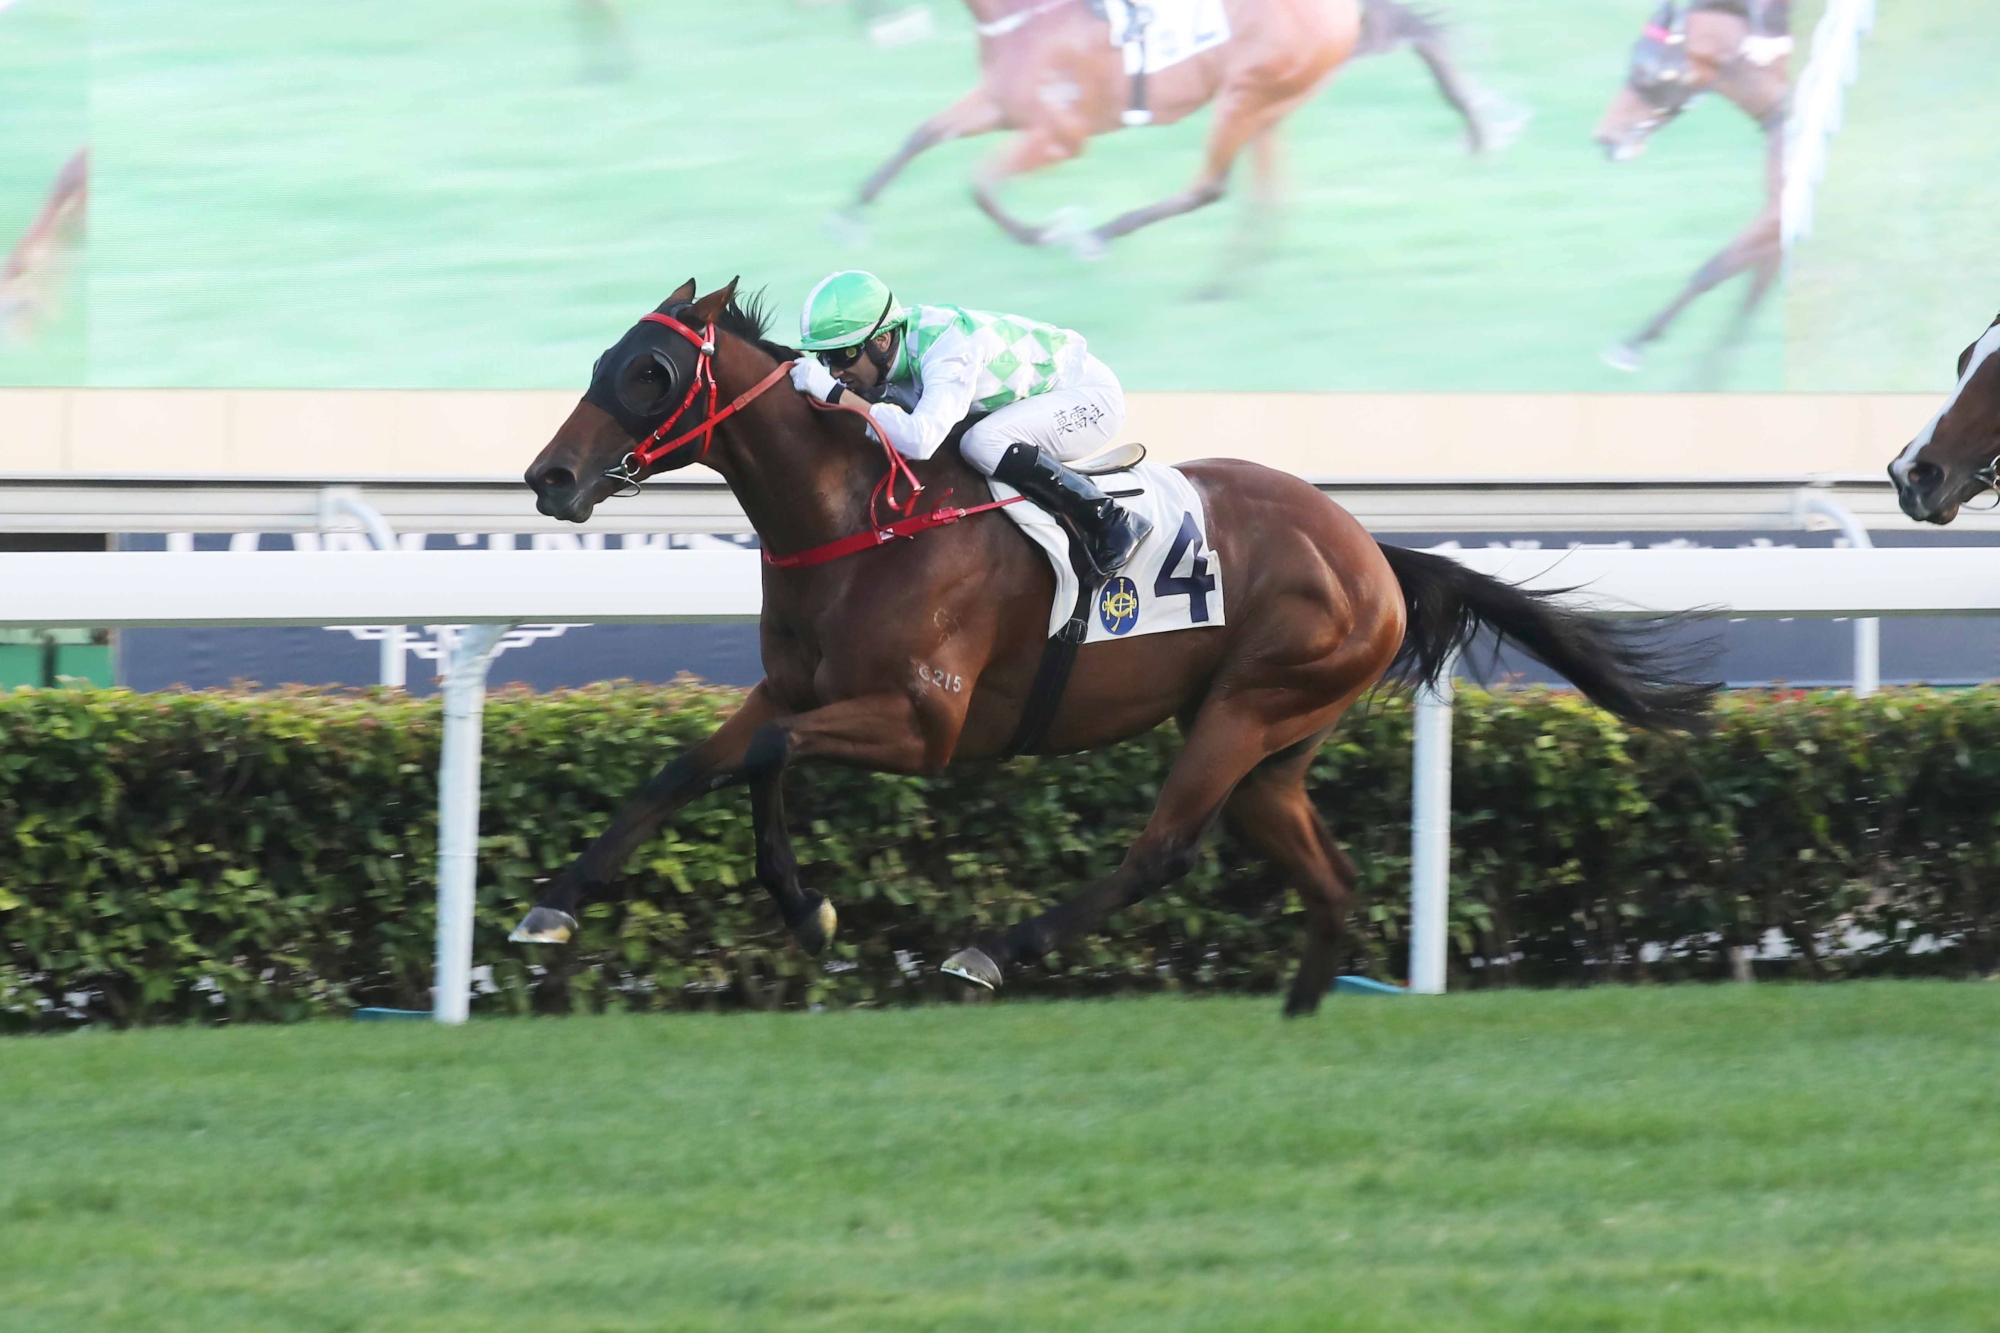 Fat Turtle – HK : Two-time Class 2 winner over 1200m; twice-placed at G3 level, latest finished sixth in G2 Jockey Club Sprint.